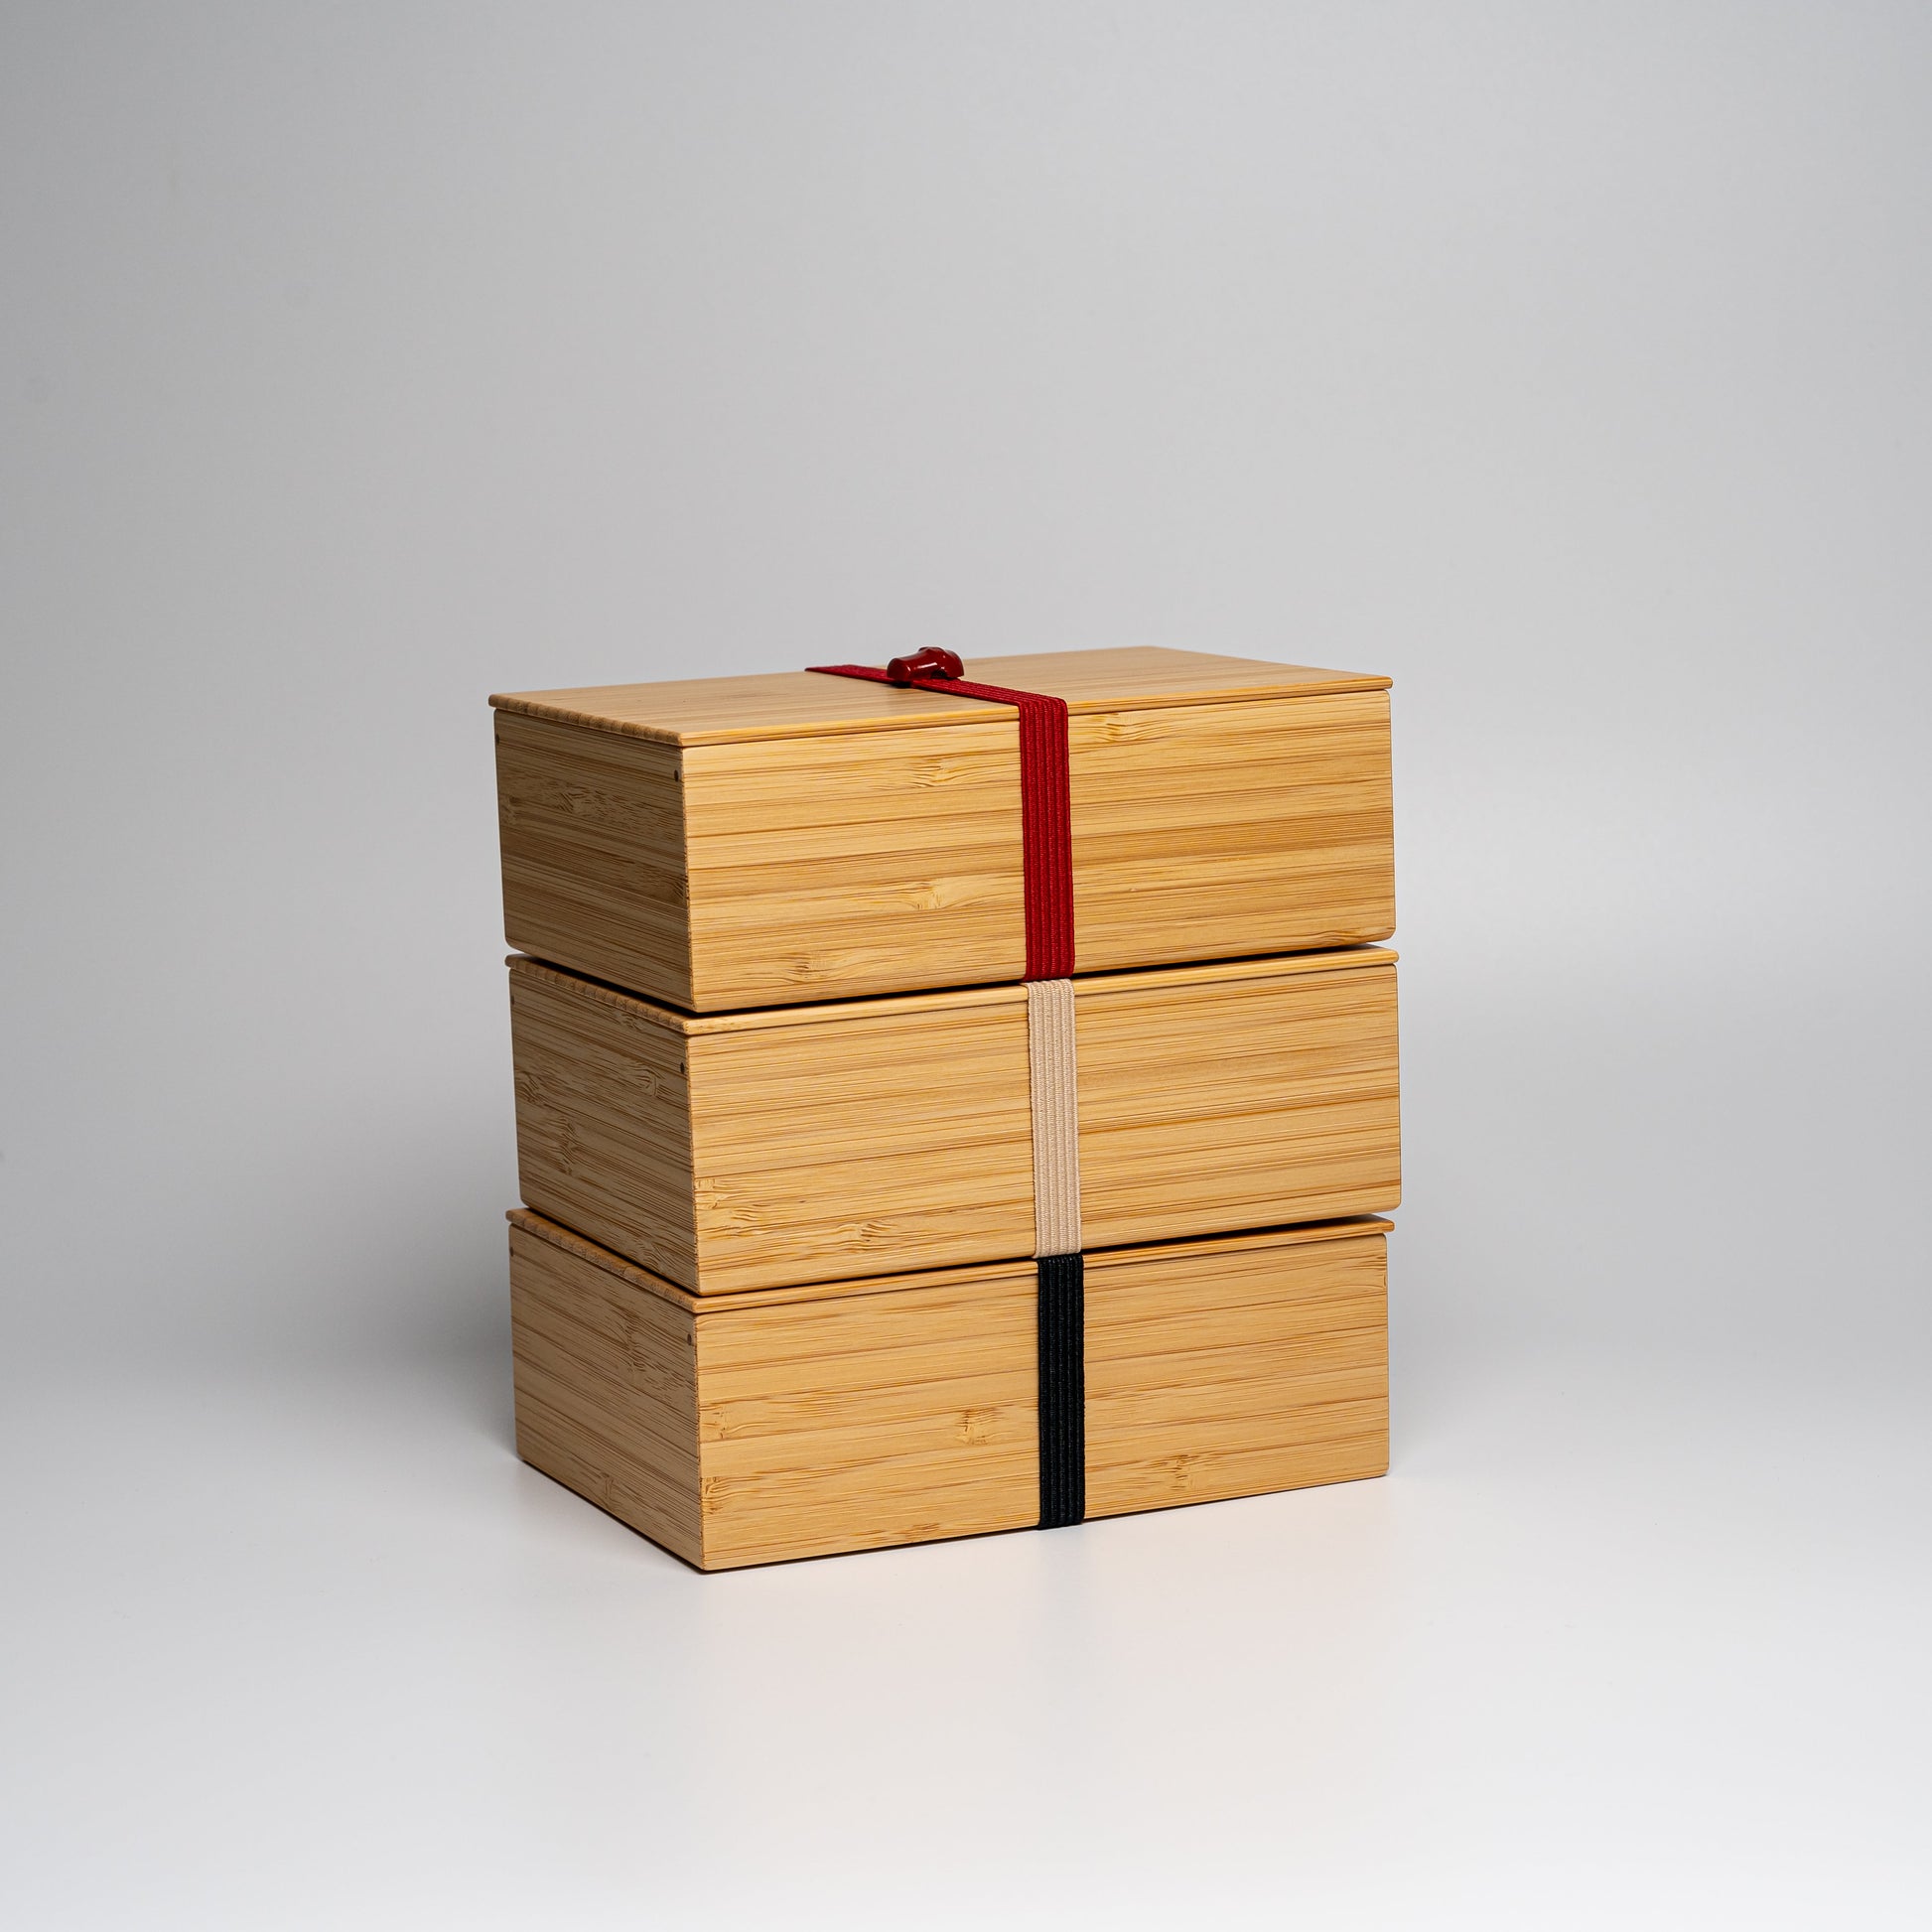 A stack of bamboo bento boxes on a white background